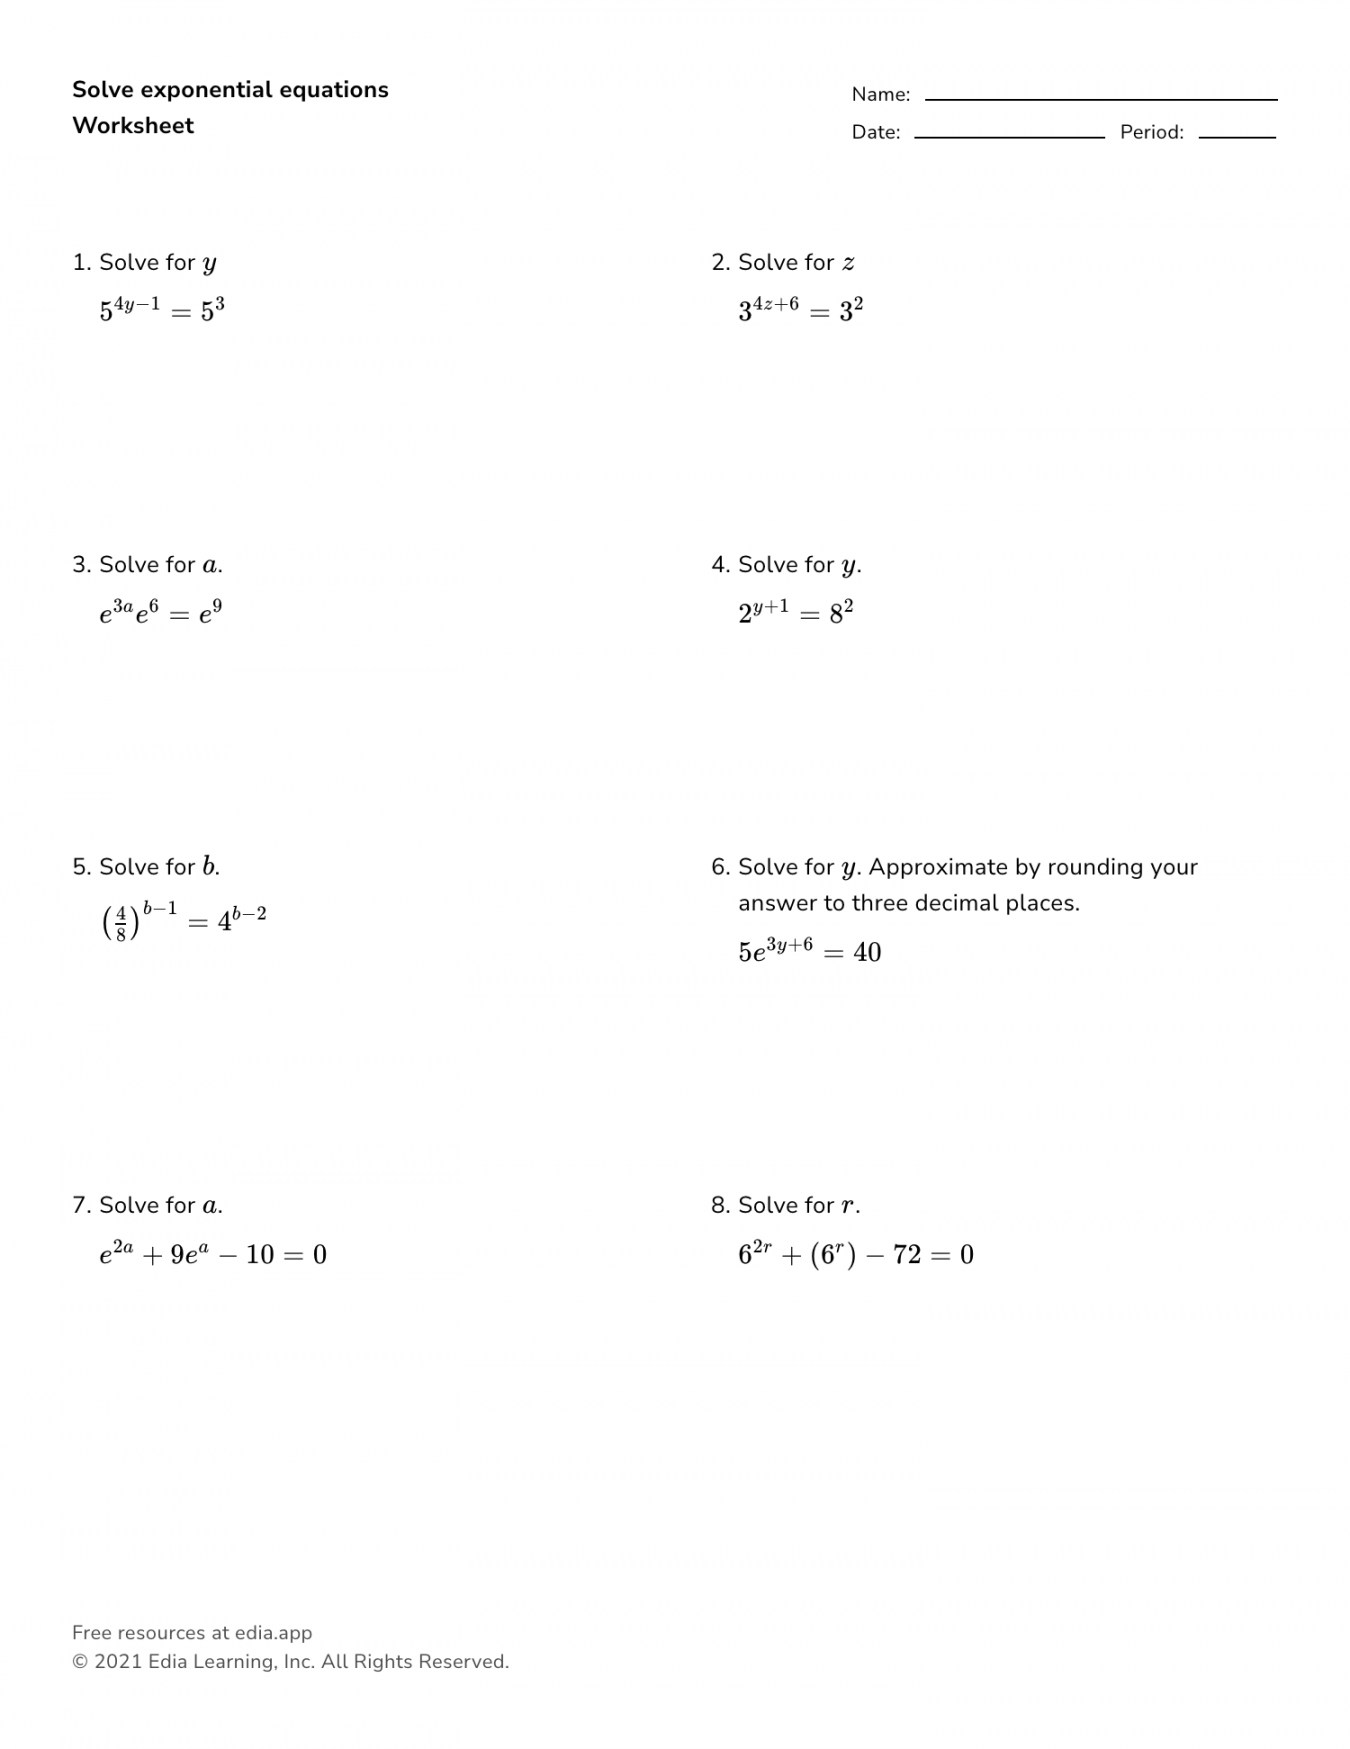 Solve Exponential Equations - Worksheet